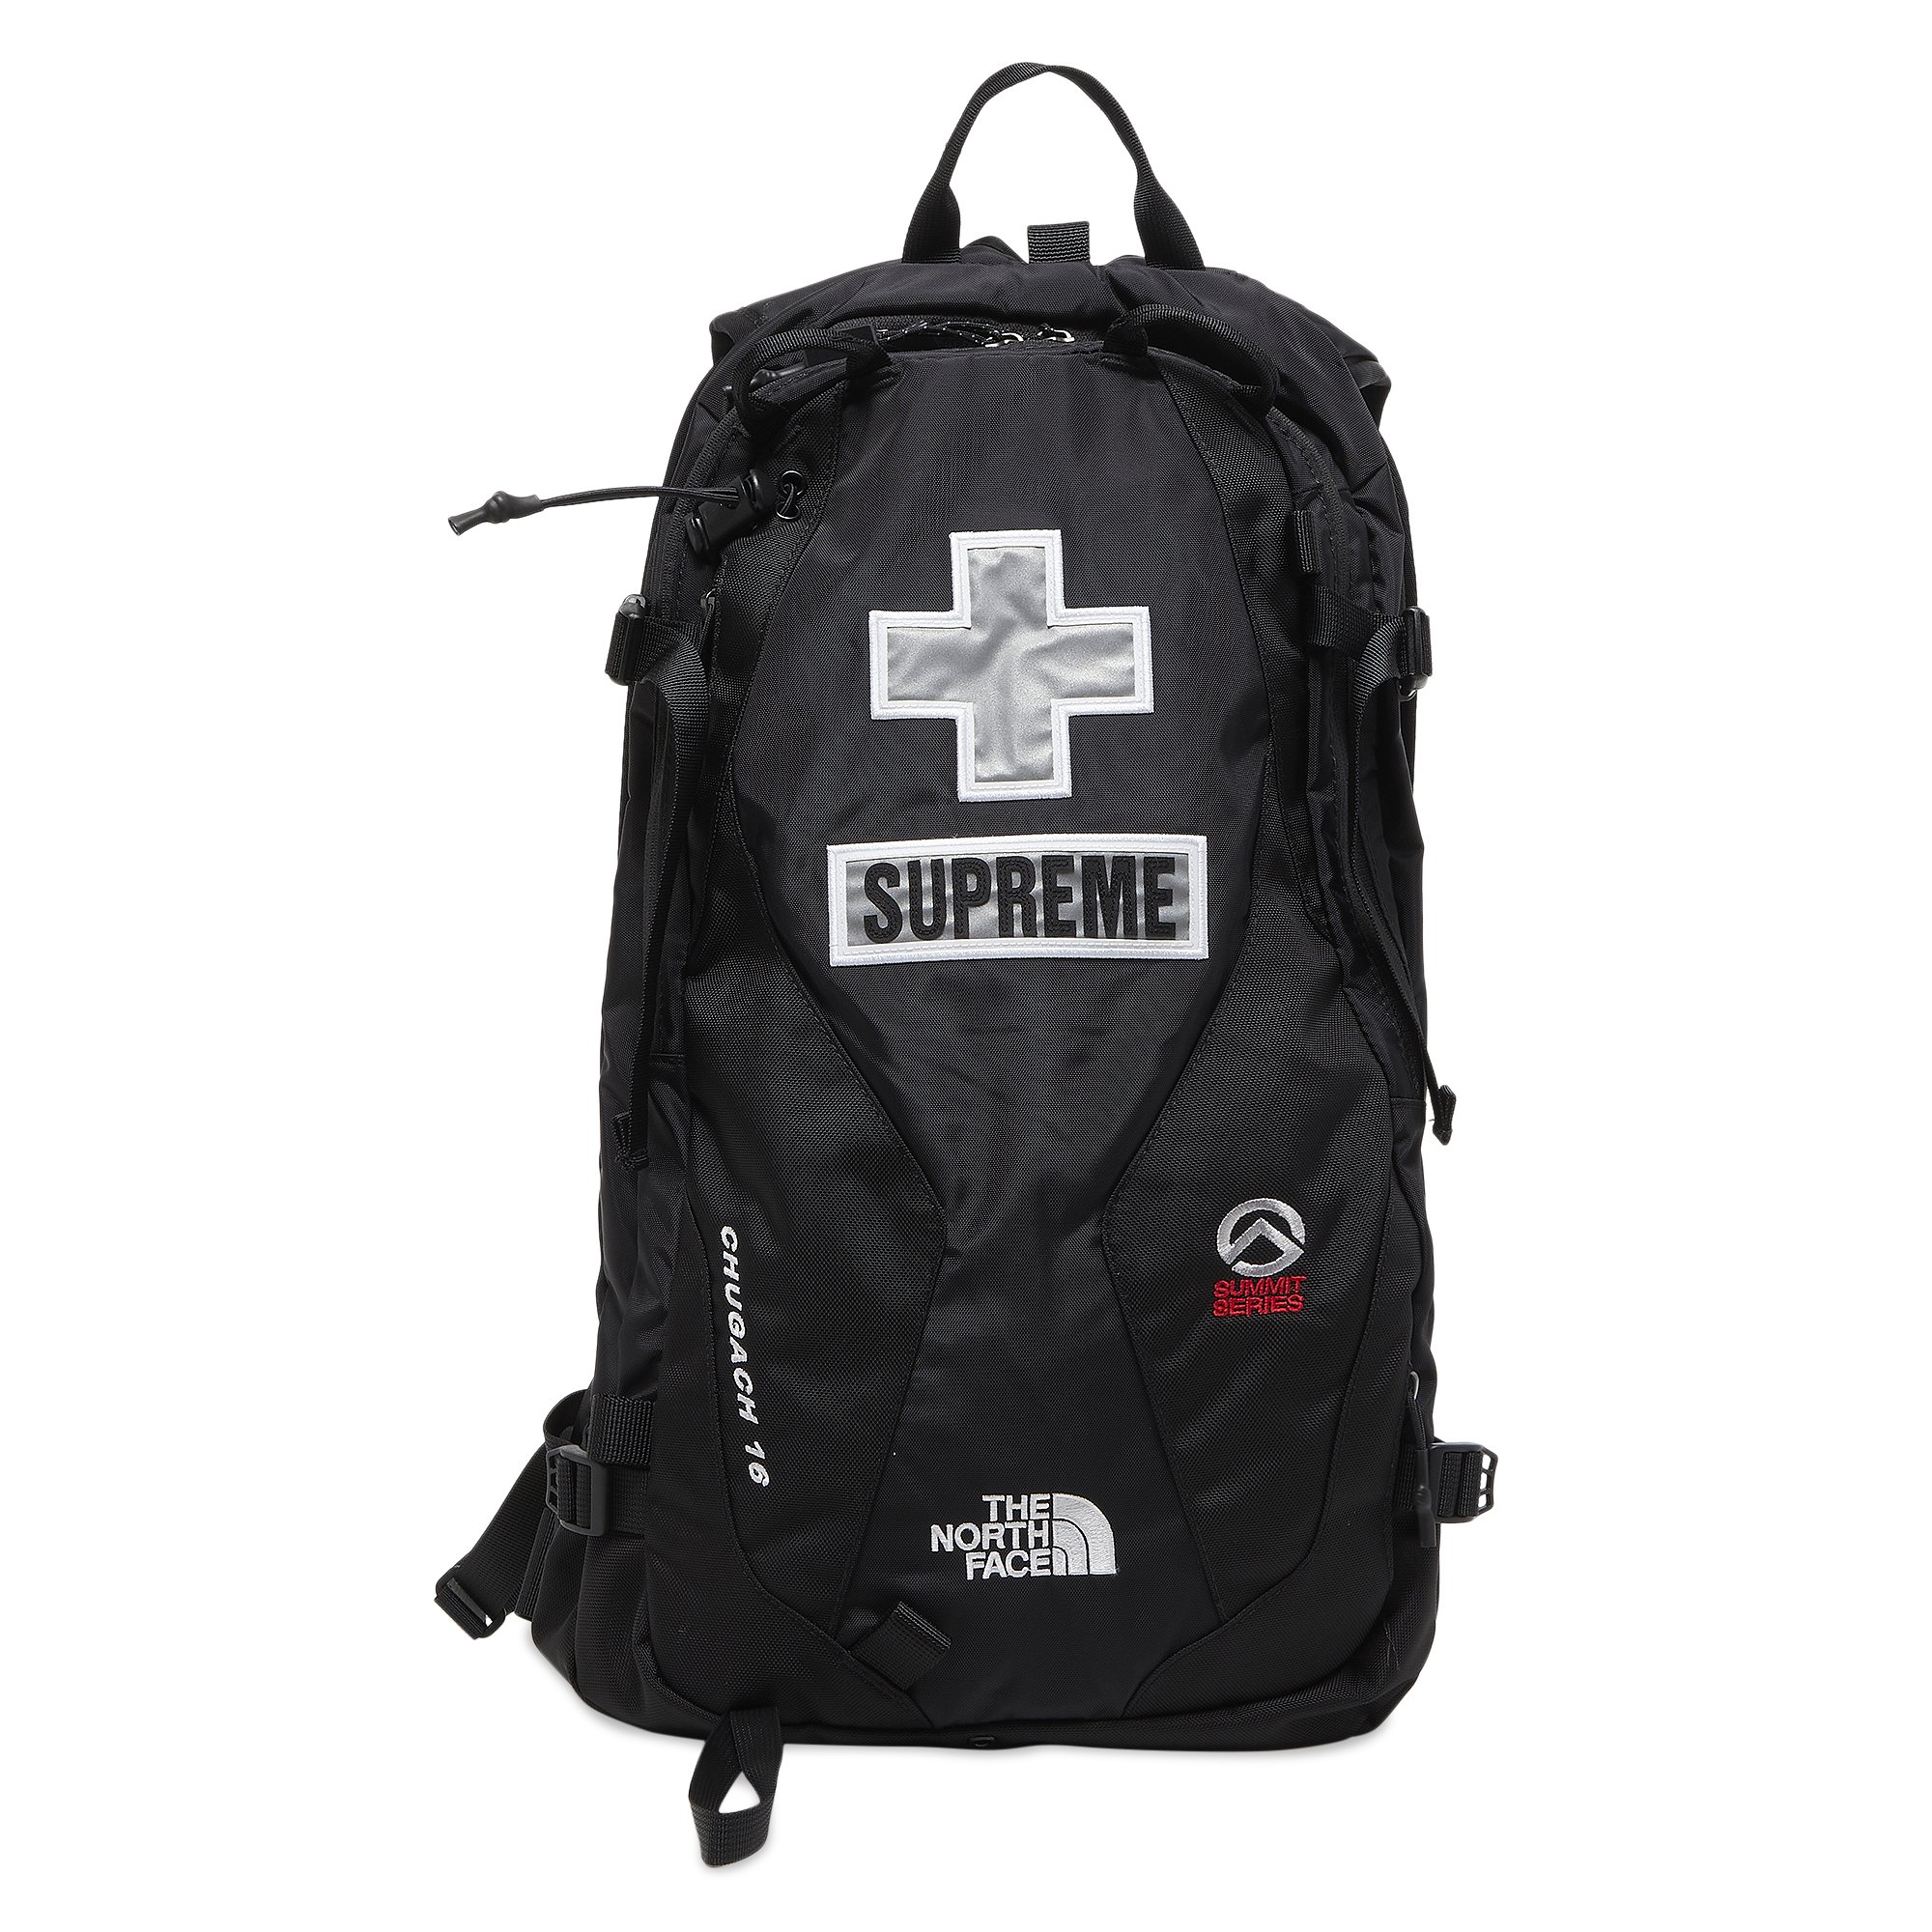 Supreme x The North Face Summit Series Rescue Chugach 16 Backpack